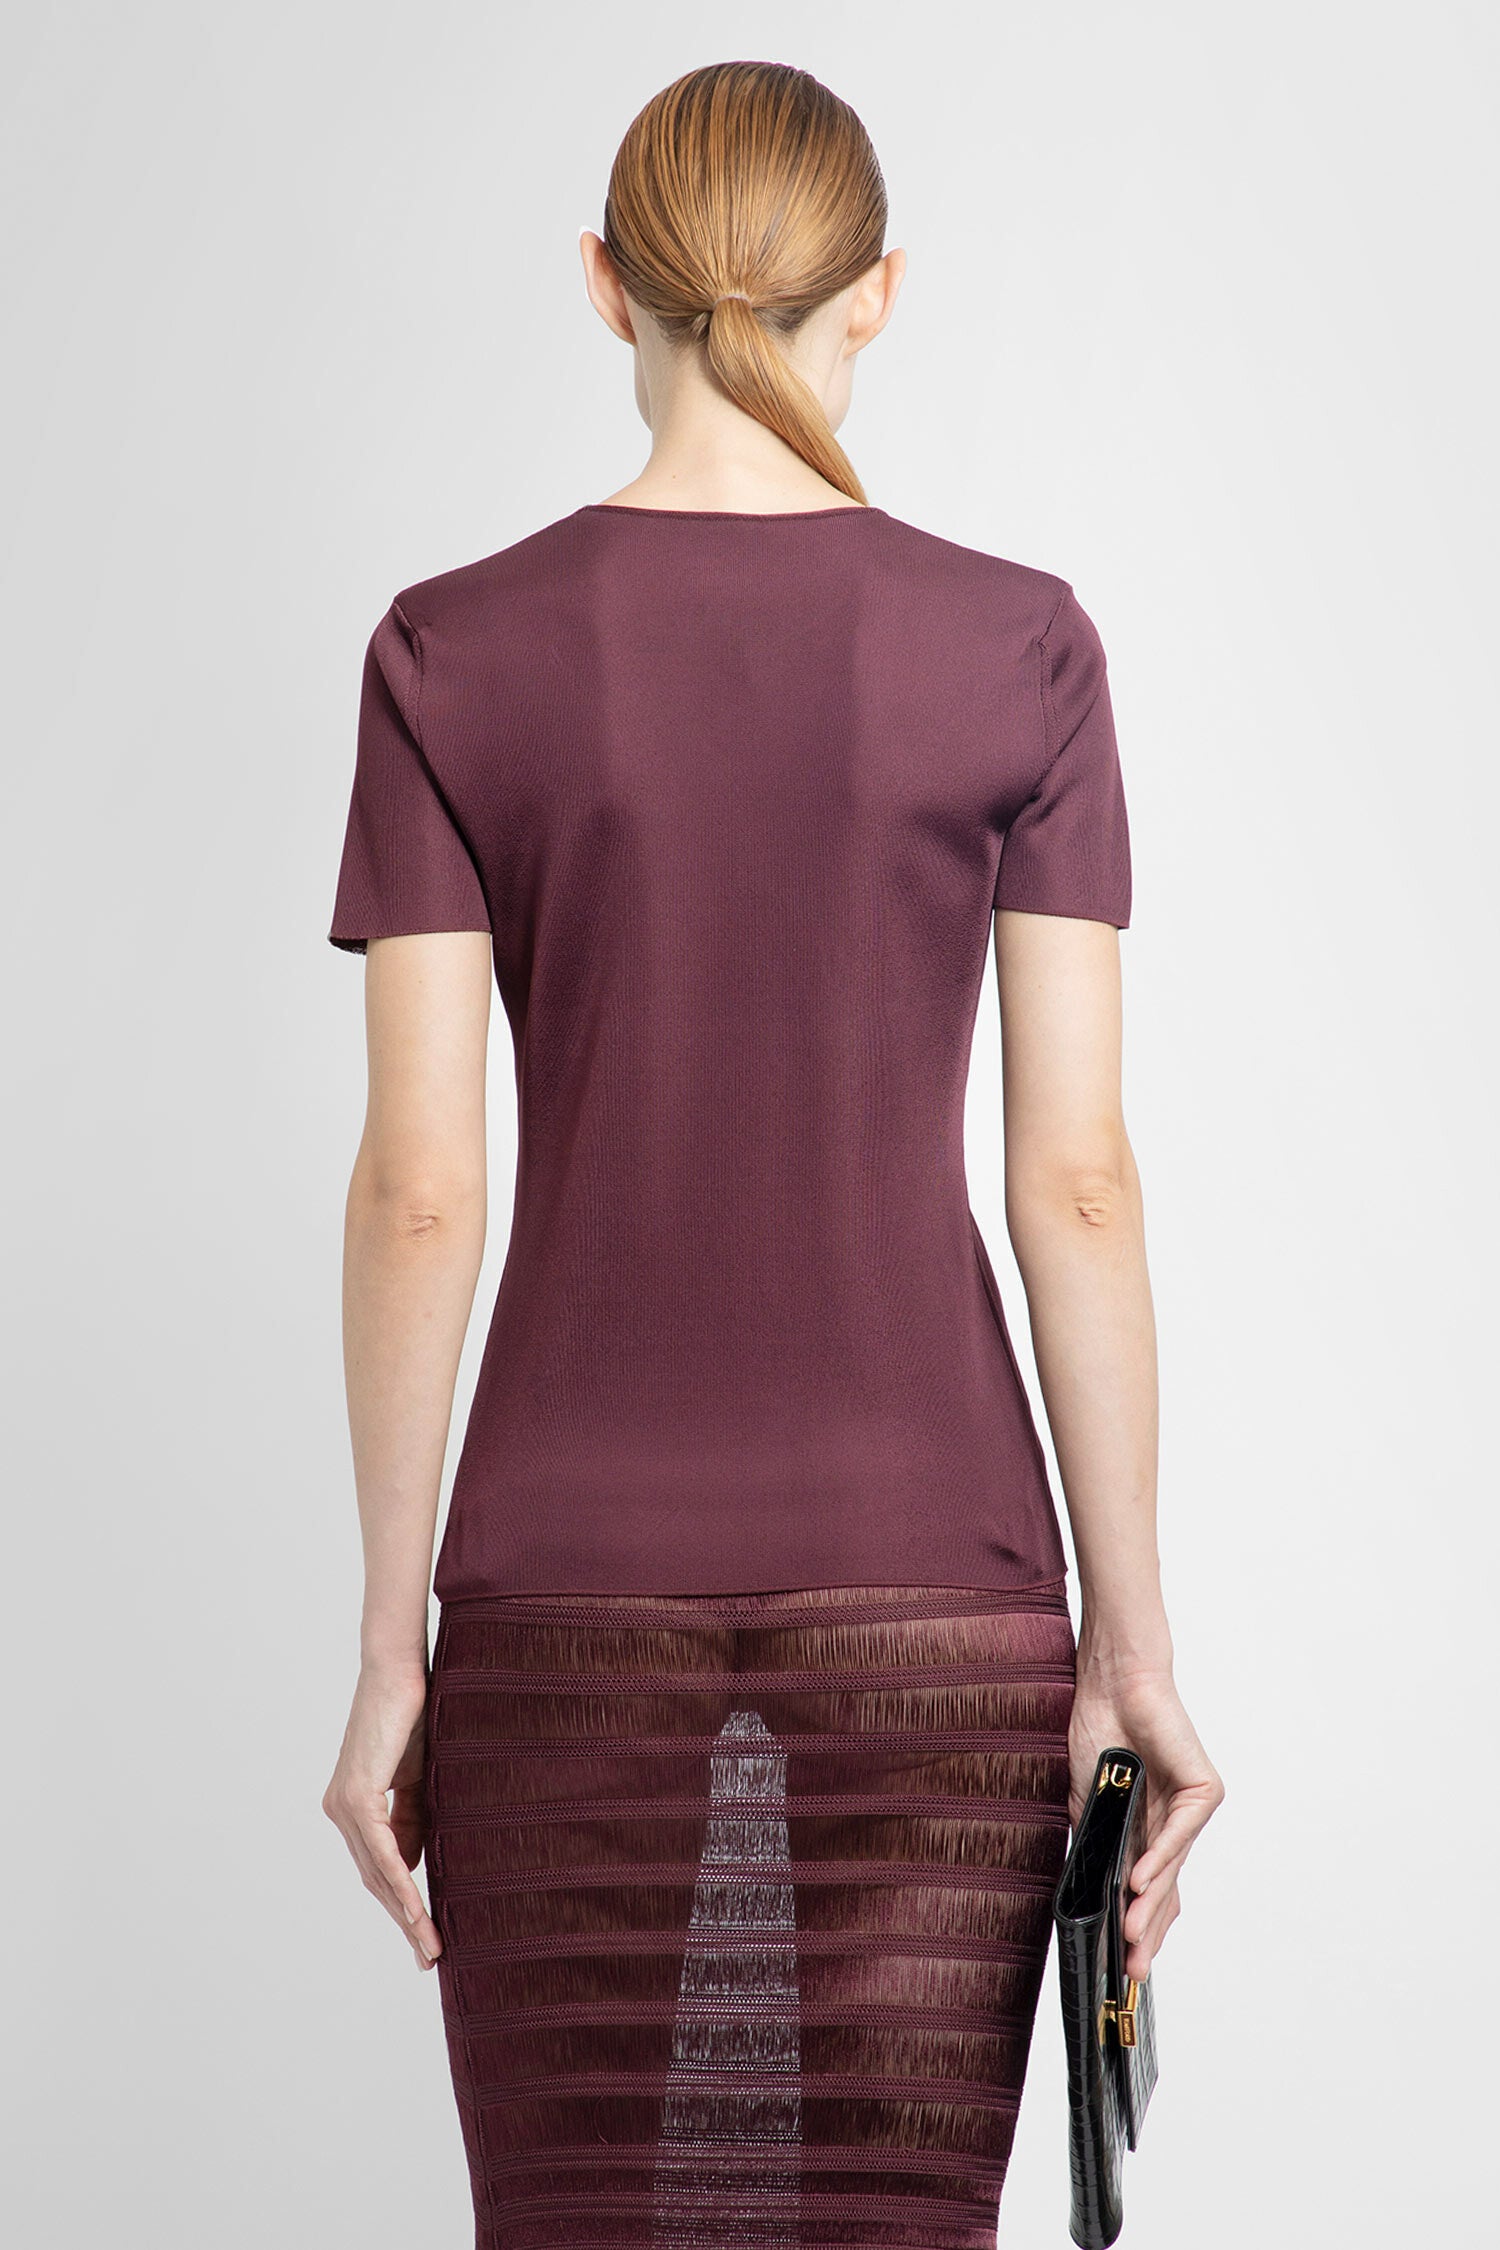 TOM FORD WOMAN RED T-SHIRTS & TANK TOPS